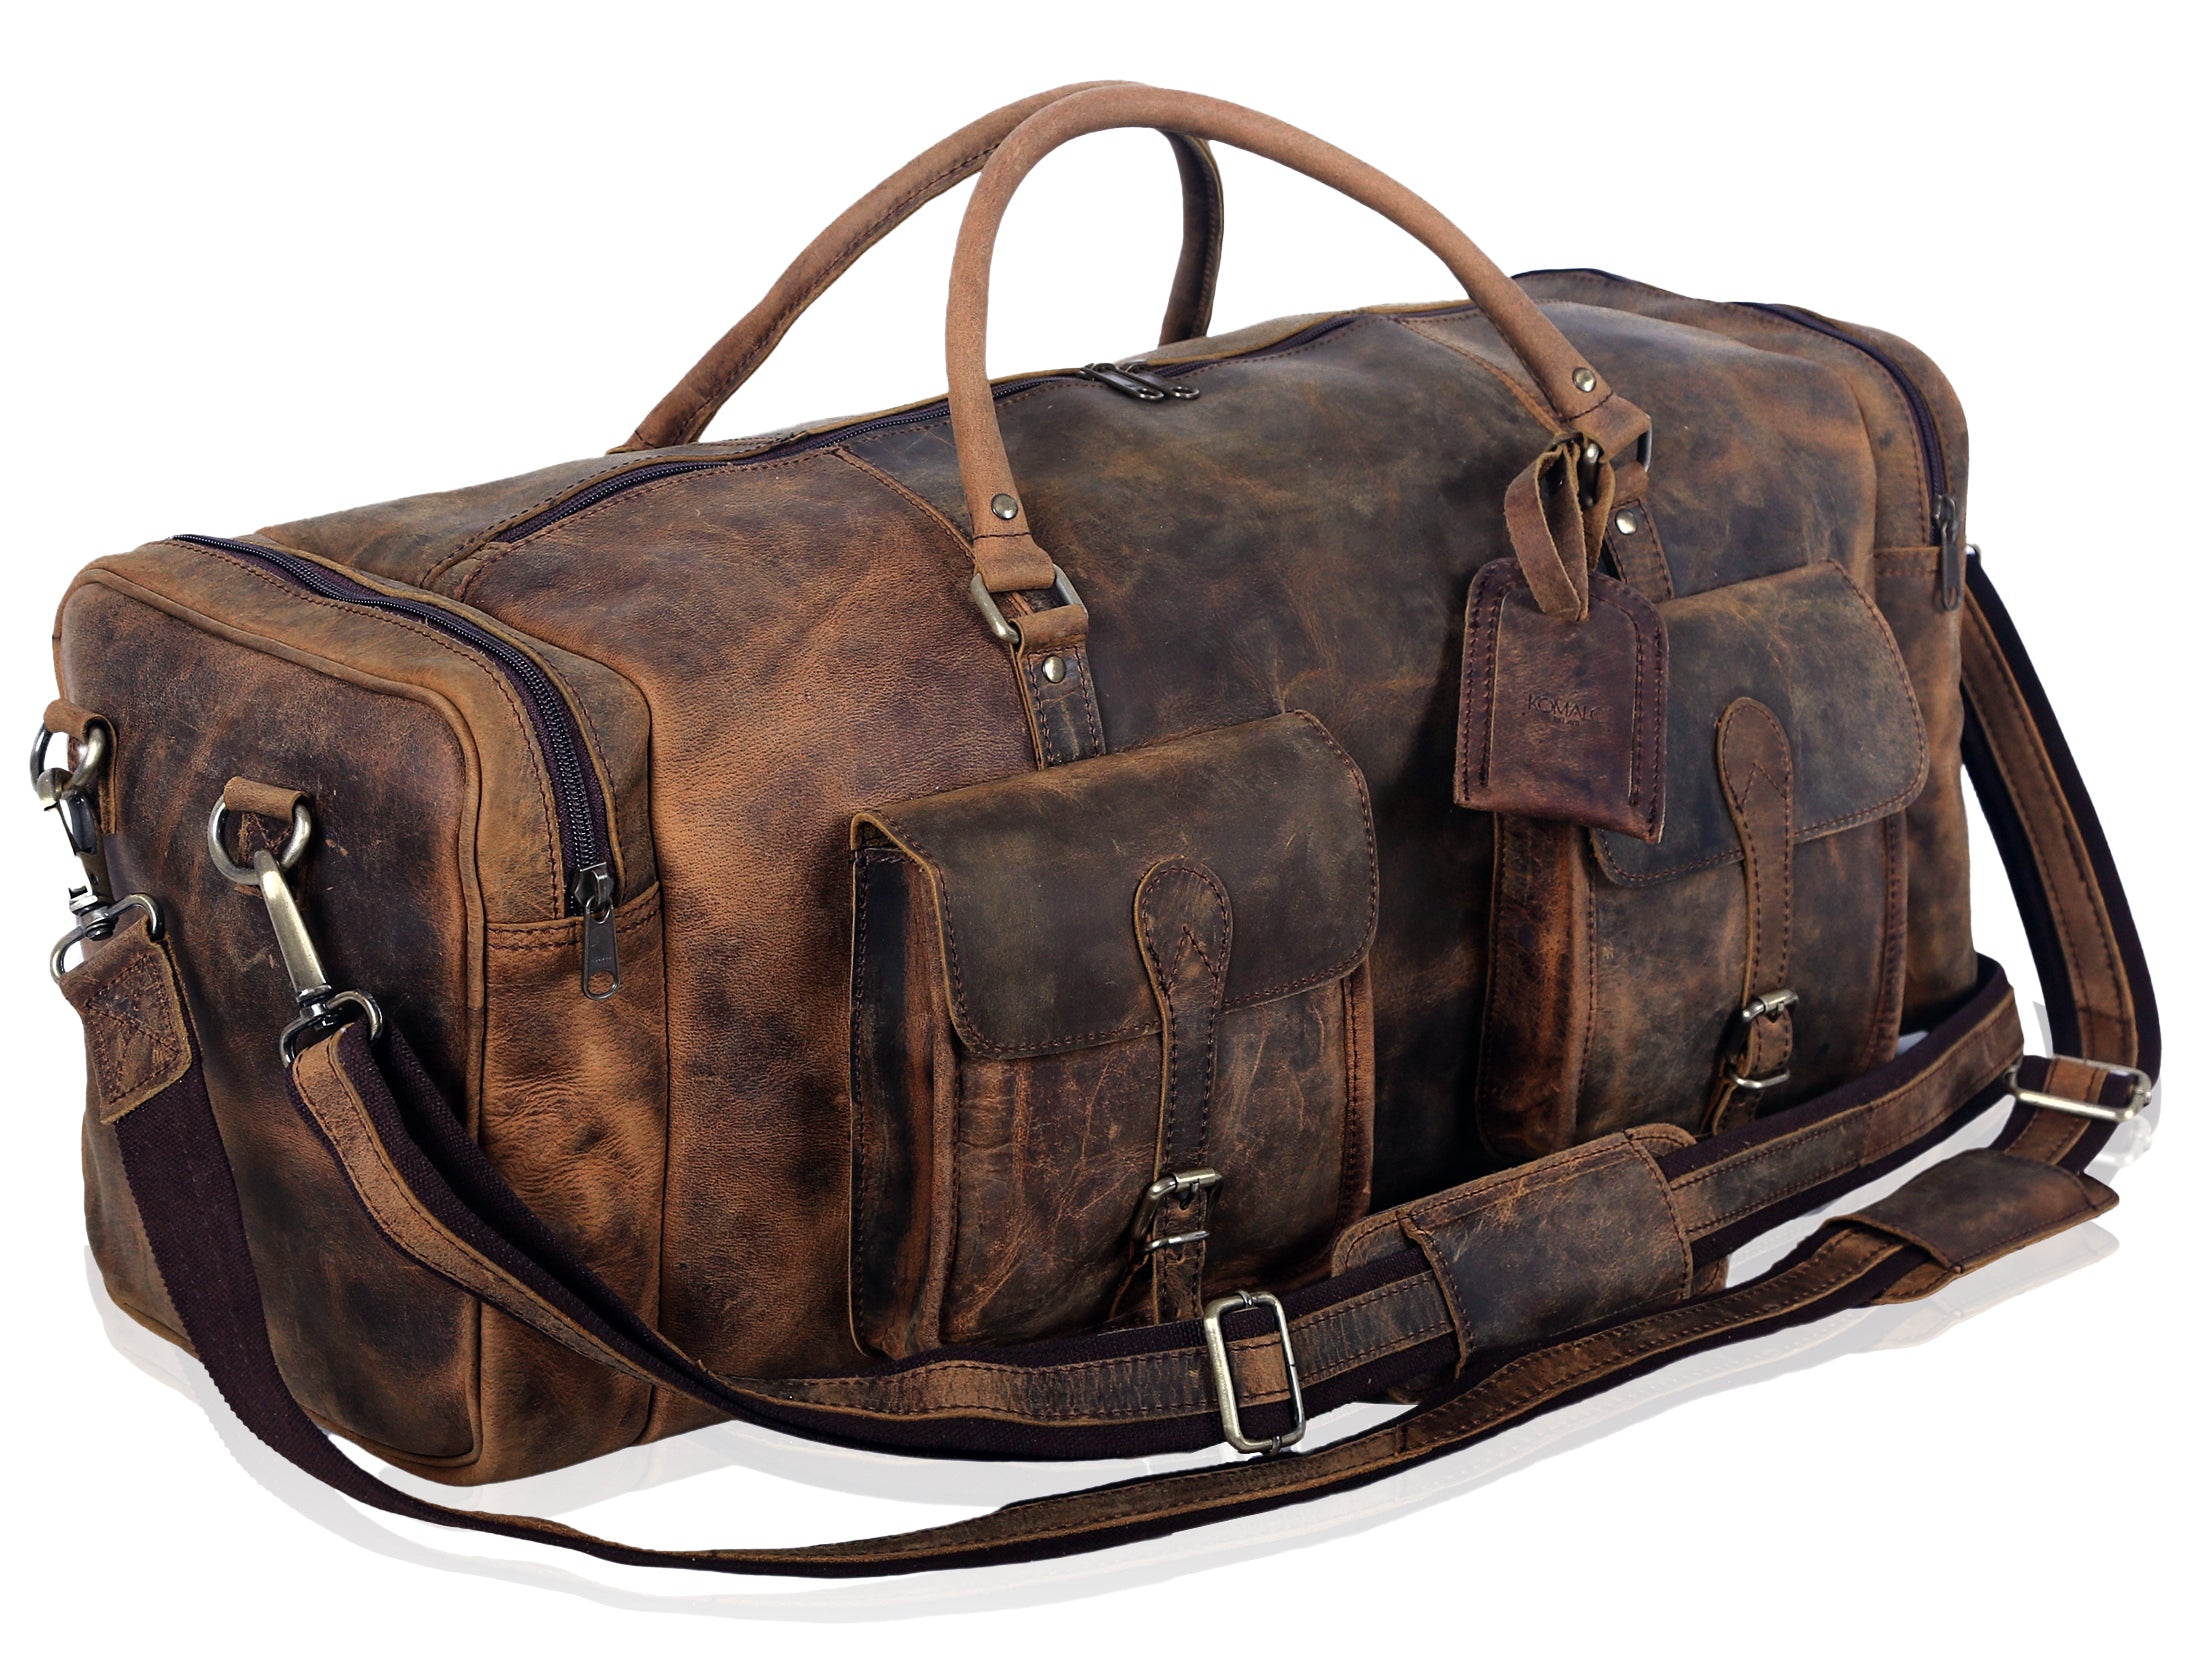 RICHPORTS Checkered Travel PU Leather Oversized Weekender Duffel